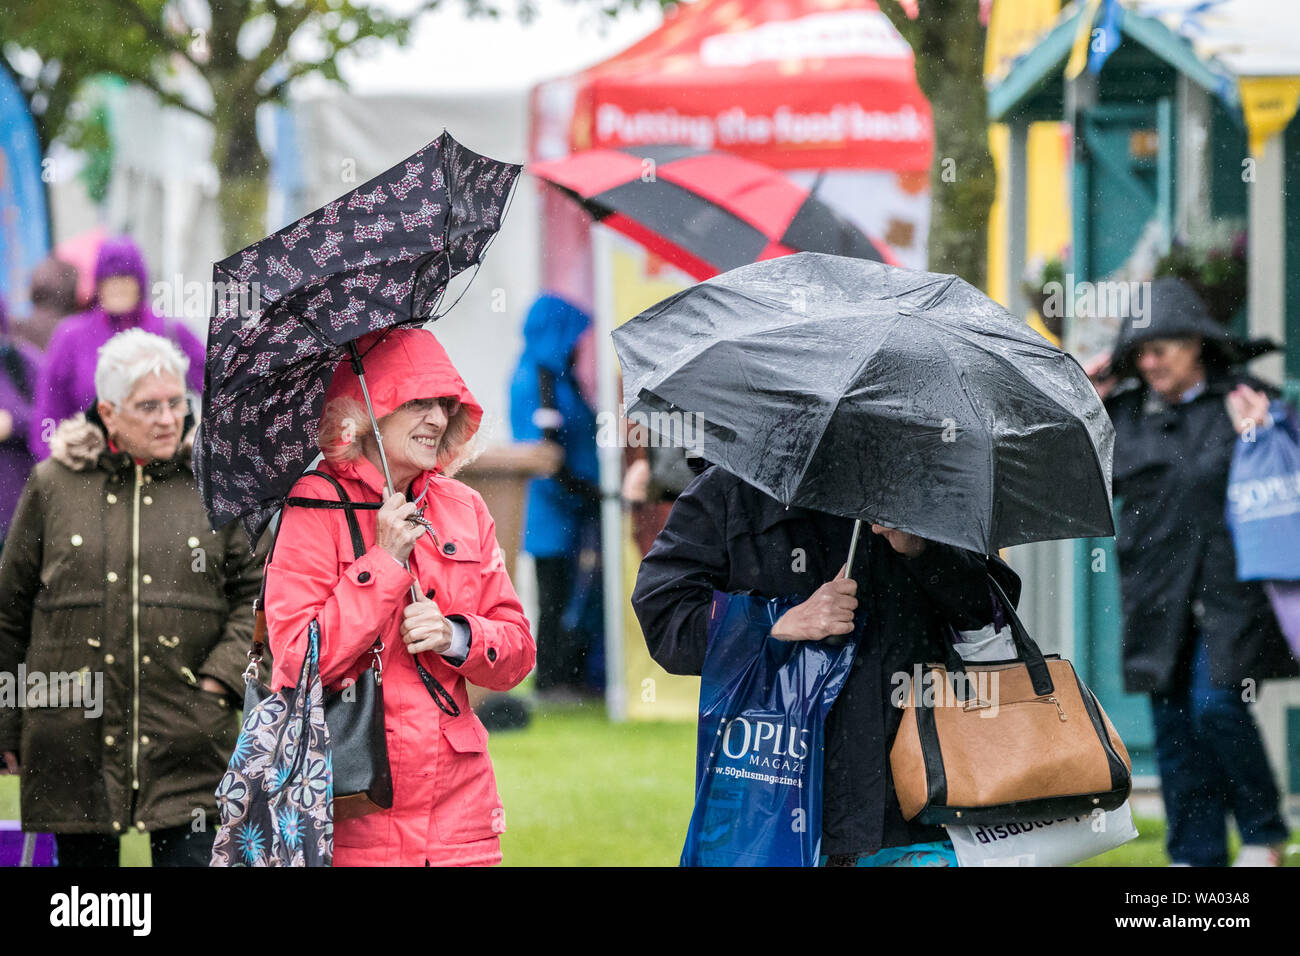 Southport, Merseyside, 16th August 2019.  Heavy rain pours down on visitors braving the awful weather as they make their way into the 2019 Southport Flower Show.  THE UK is set to be battered by more than a month's worth of rain today - before the hot weather returns for the Bank Holiday.  Credit: Cernan Elias/Alamy Live News Stock Photo